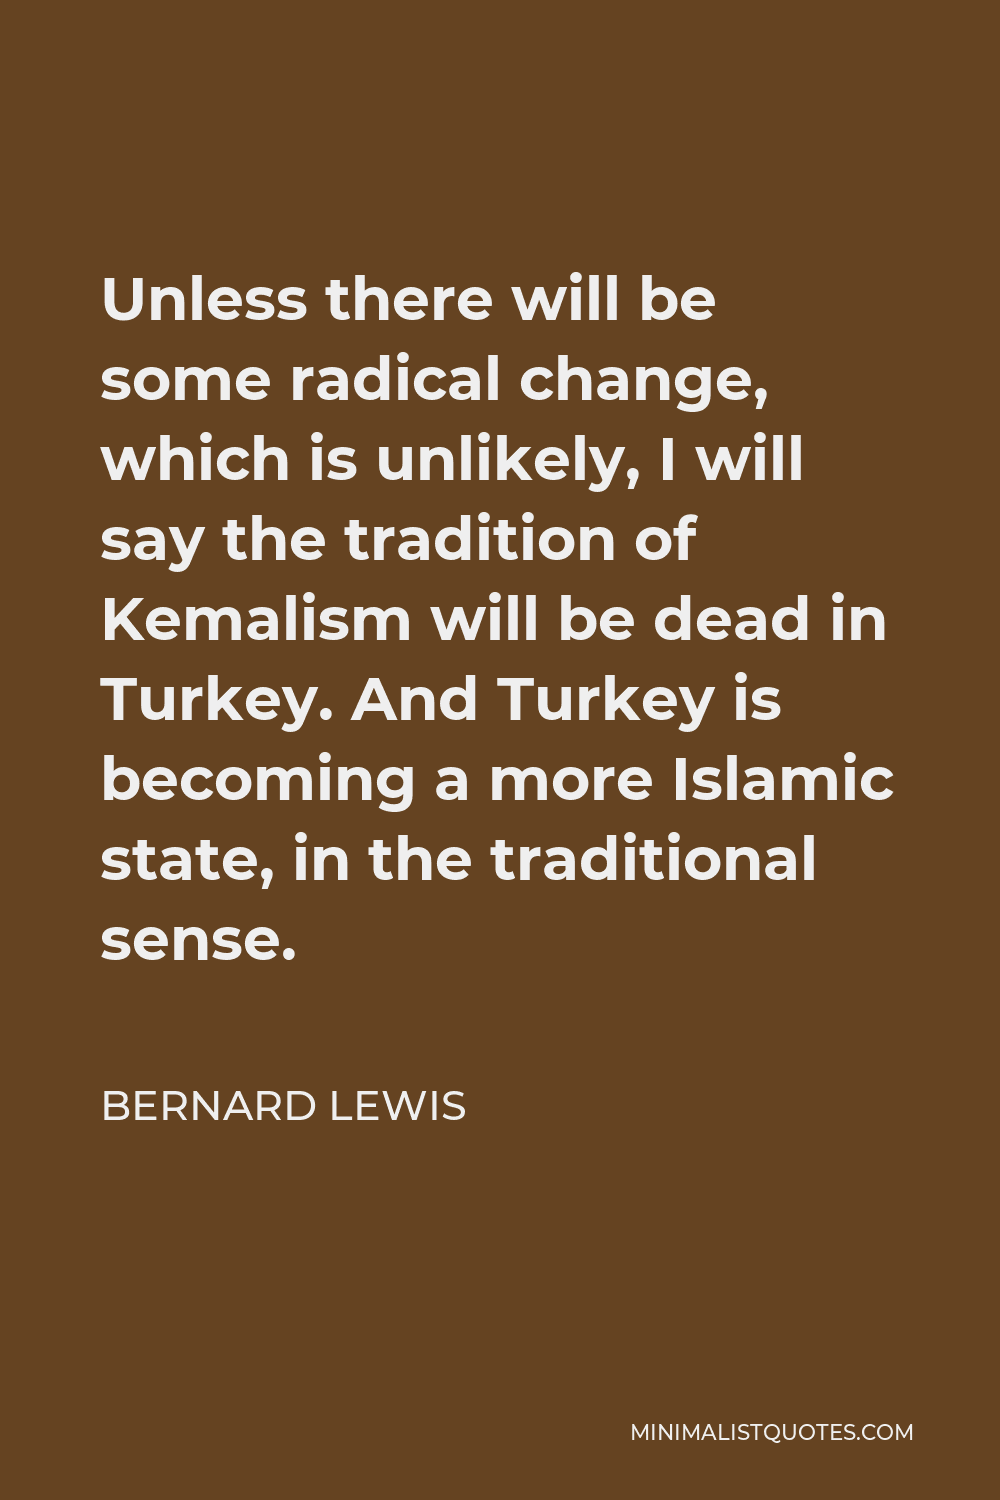 Bernard Lewis Quote - Unless there will be some radical change, which is unlikely, I will say the tradition of Kemalism will be dead in Turkey. And Turkey is becoming a more Islamic state, in the traditional sense.